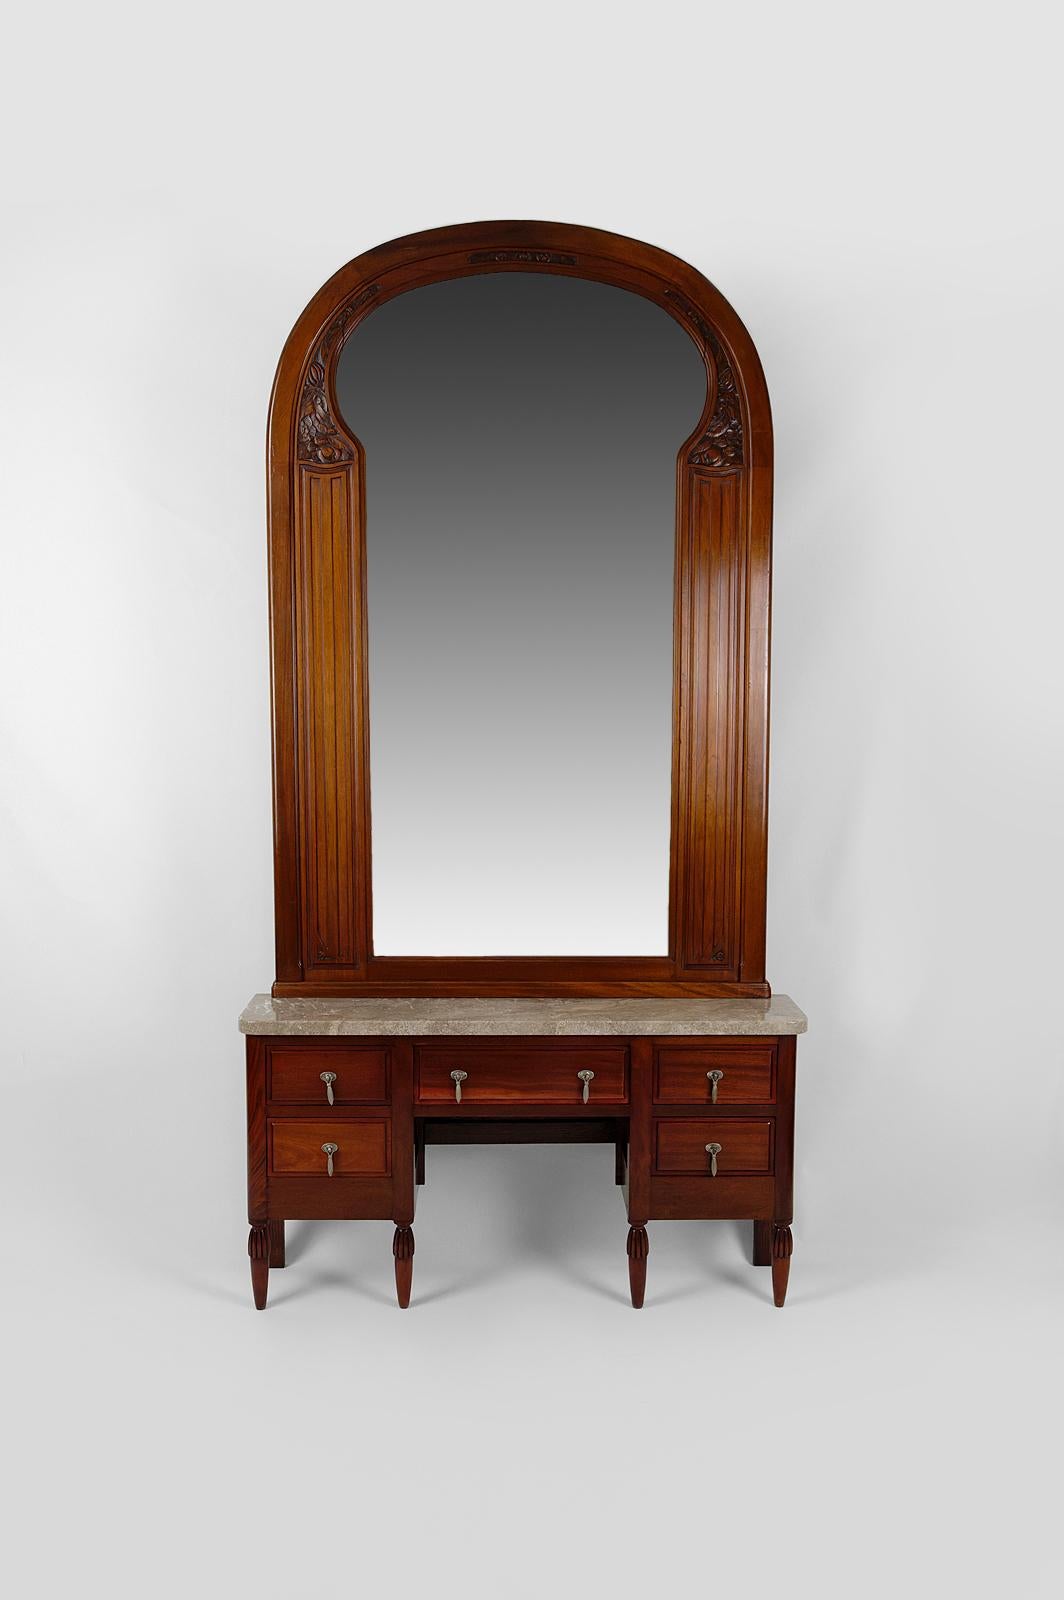 Superb and impressive entrance / entryway console consisting of a low 5-drawers cabinet with a marble top, on which is placed an imposing mirror with a carved frame.

In walnut and beech.
Beveled mirror, frame carved with flowers.
High quality gray